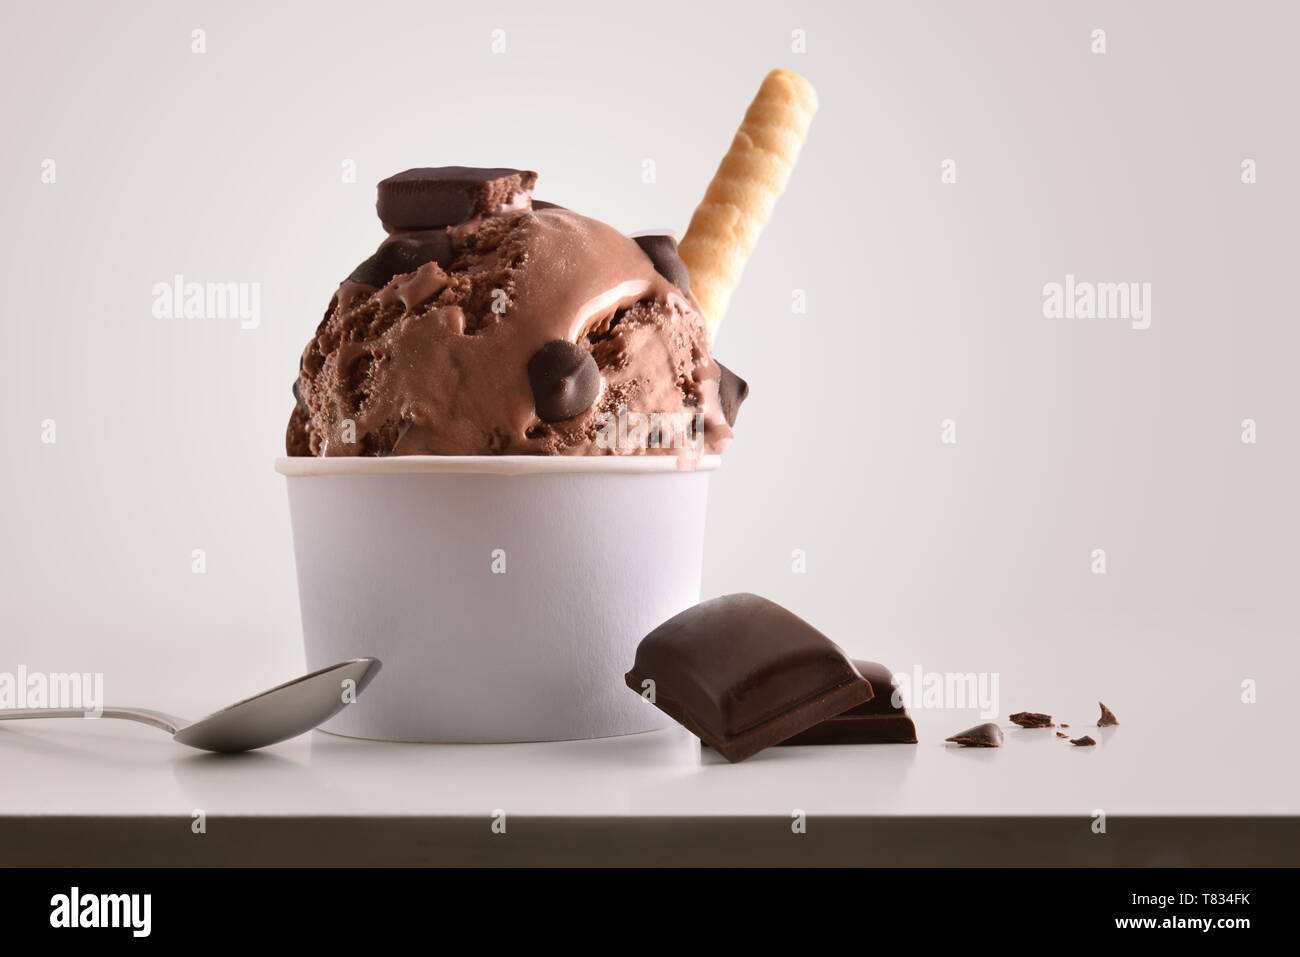 https://c8.alamy.com/comp/T834FK/composition-of-chocolate-ice-cream-ball-in-paper-cup-on-white-table-with-products-of-ornament-and-elaboration-isolated-background-horizontal-composit-T834FK.jpg